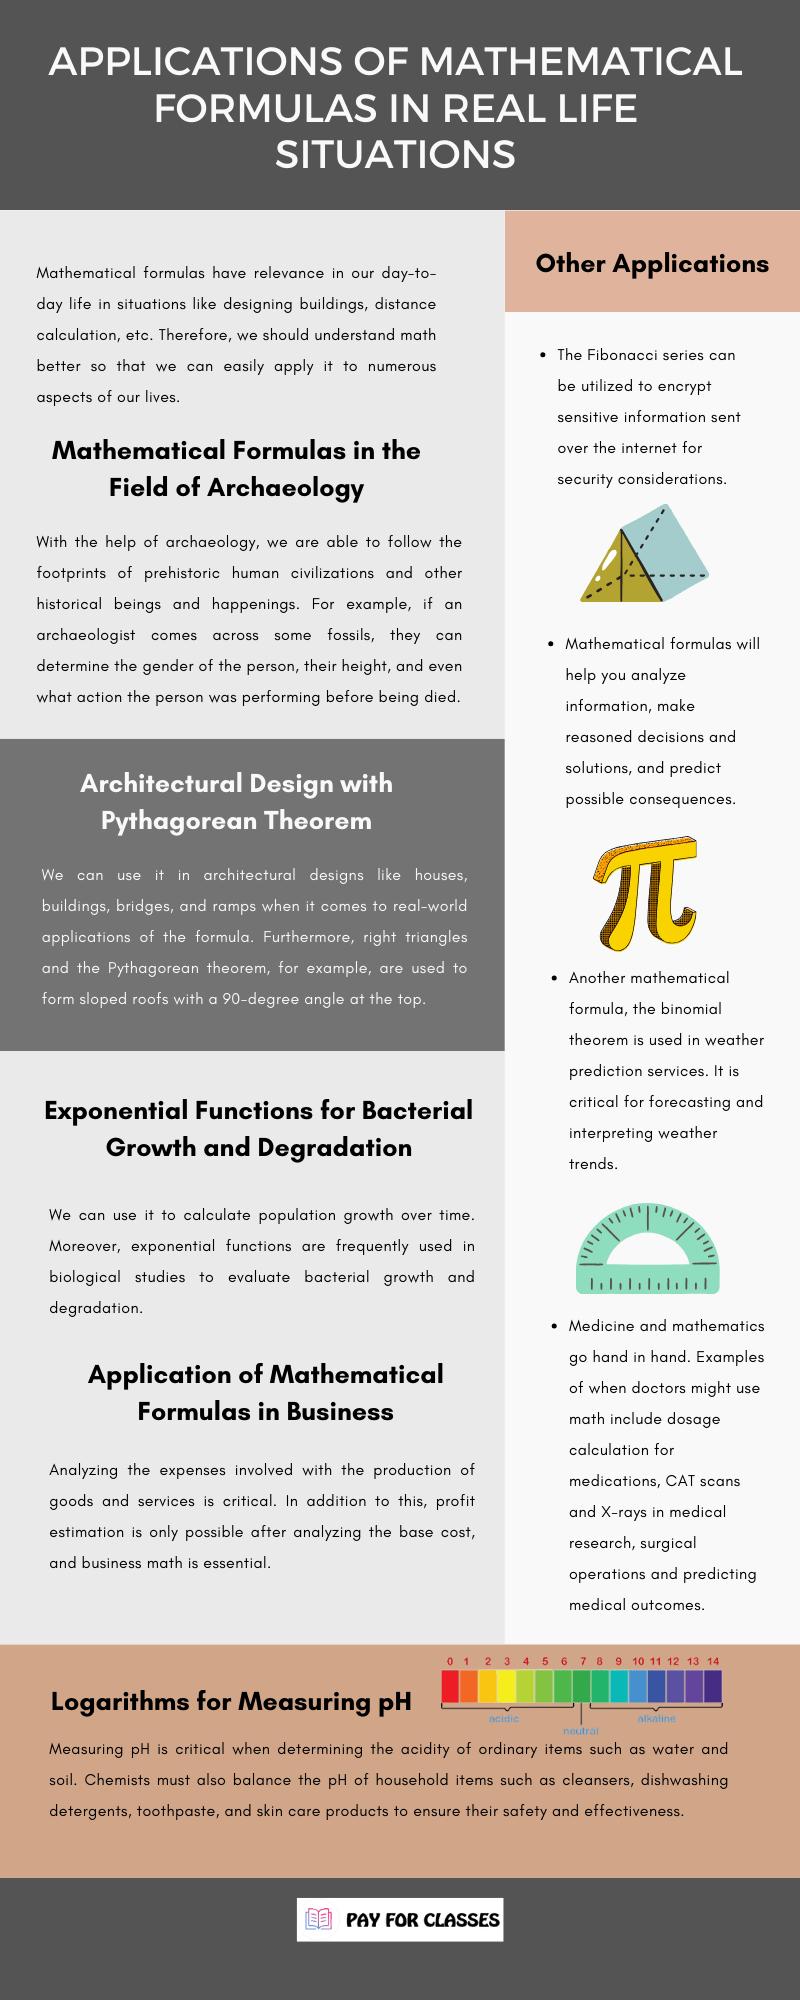 Applications-of-Mathematical-Formulas-in-Real-Life-Situations